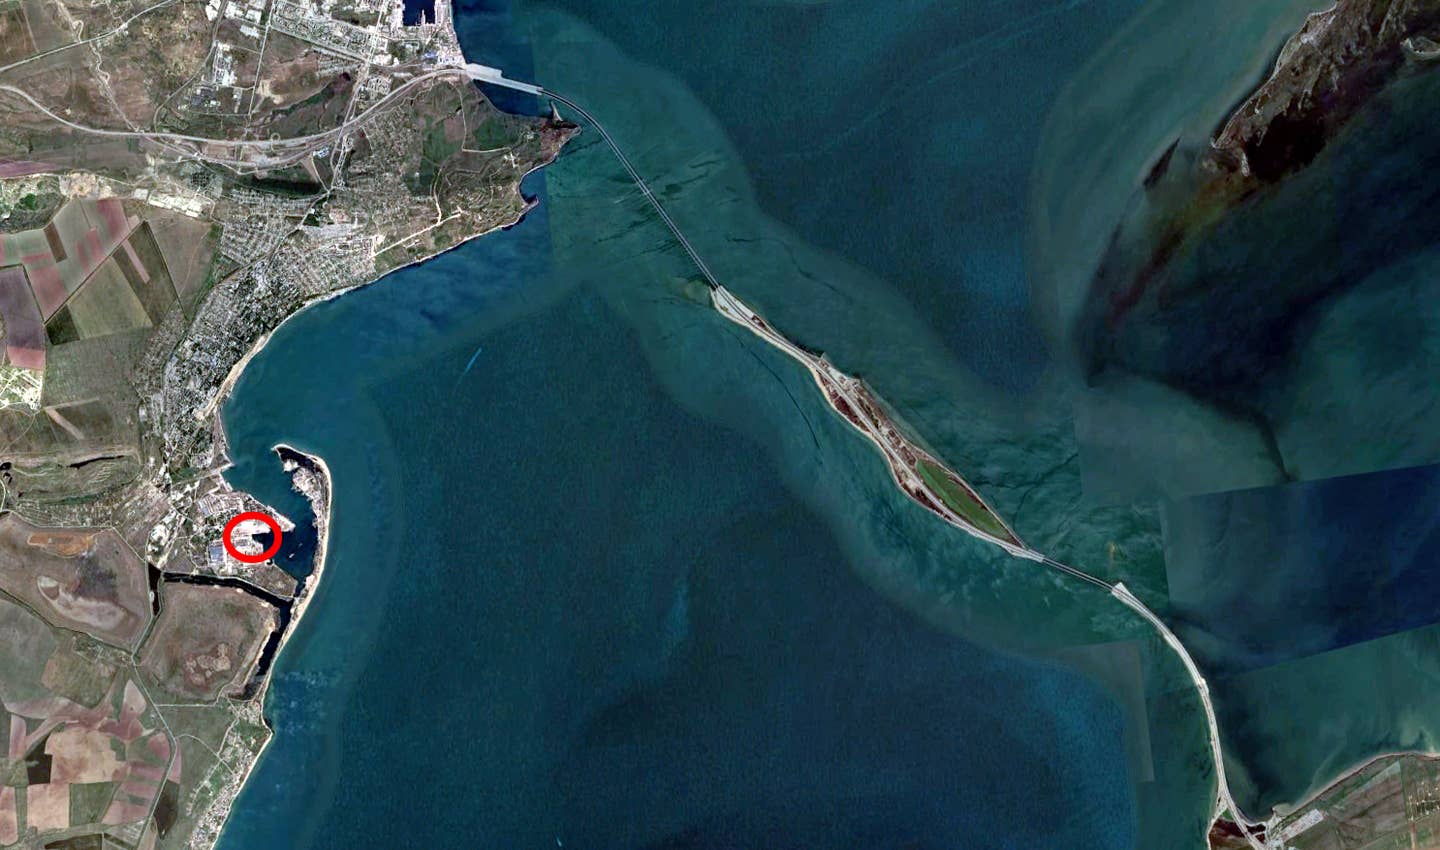 The Zaliv shipyard, where the Russian missile corvette Askold was struck Nov. 4 by Ukrainian cruise missiles, is about five miles west of the Kerch Bridge. (Google Earth image)